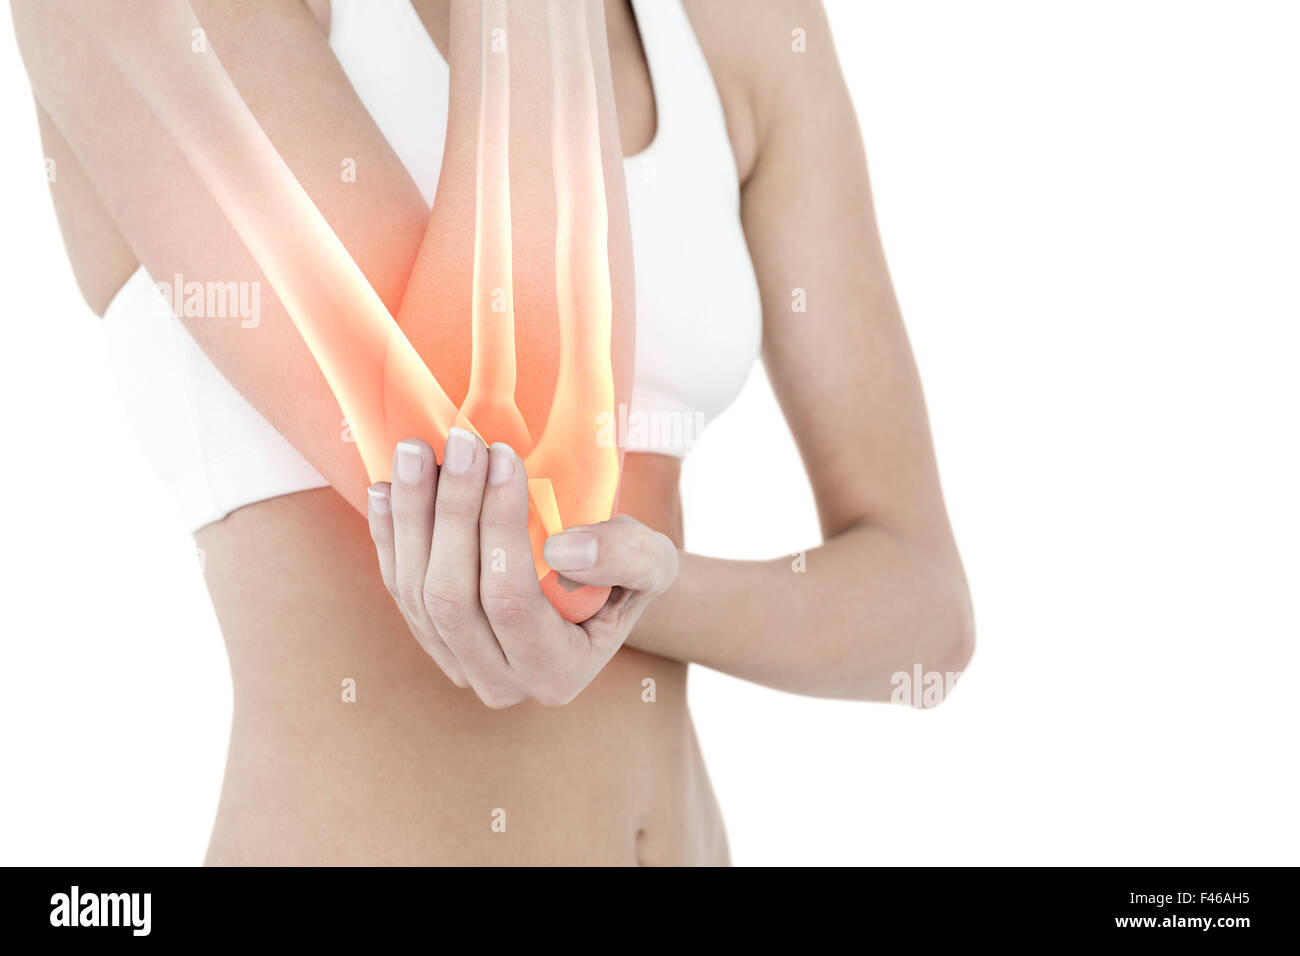 Highlighted elbow pain of woman Stock Photo